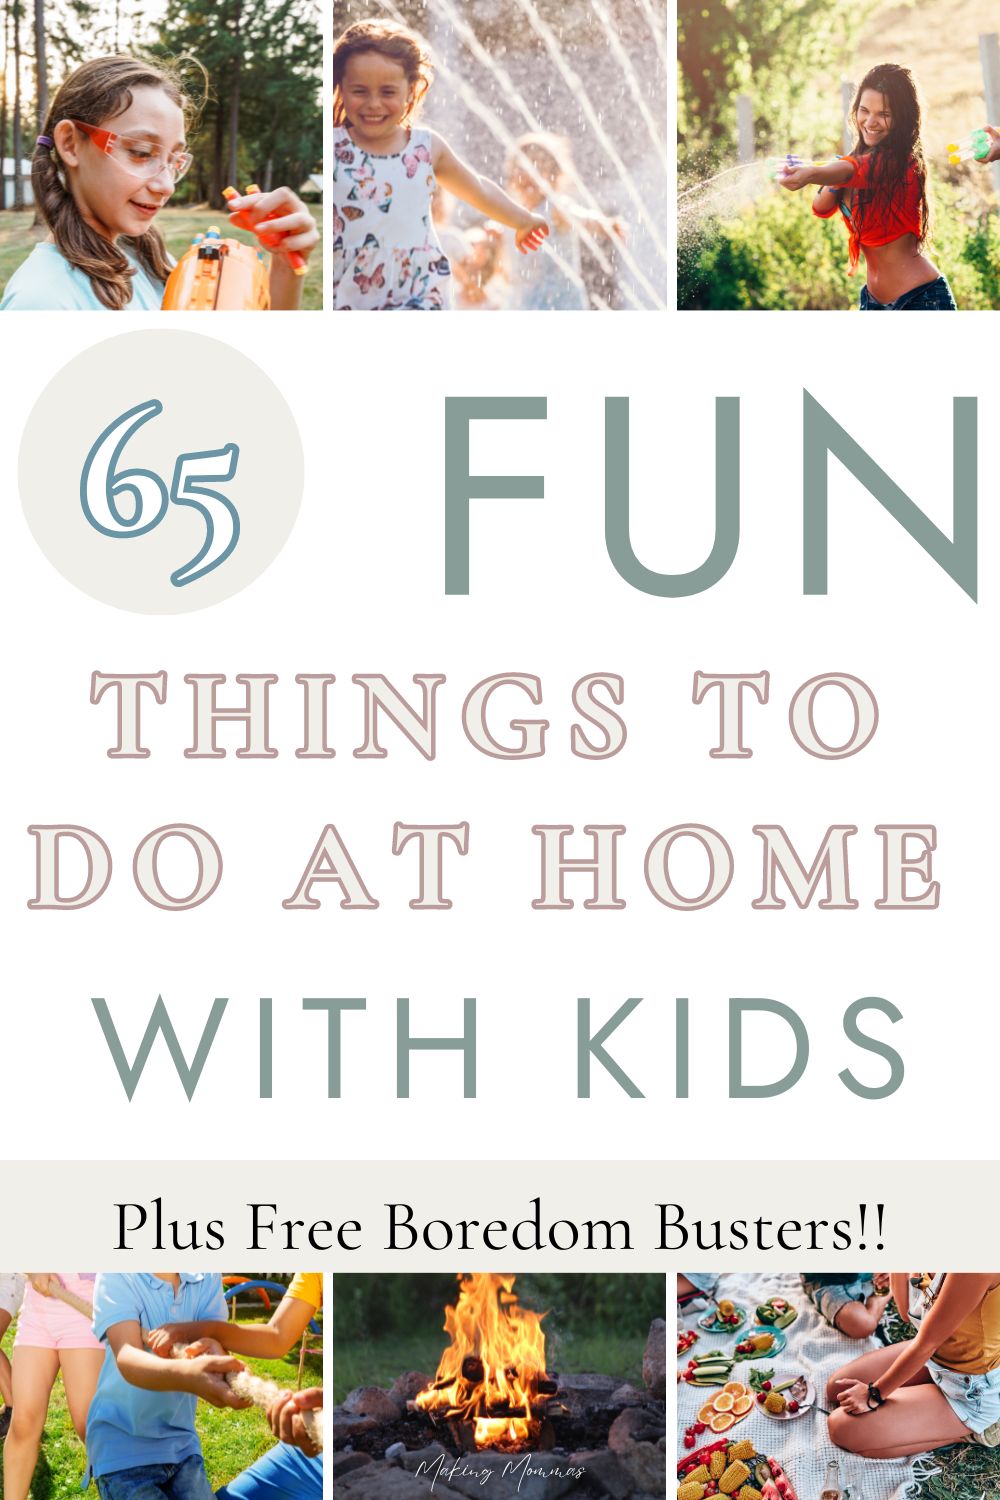 pin image of 65 fun things to do at home with the kids, with images of kids playing in the water, with nerf guns, having a picnic and a fire, and playing tug of war